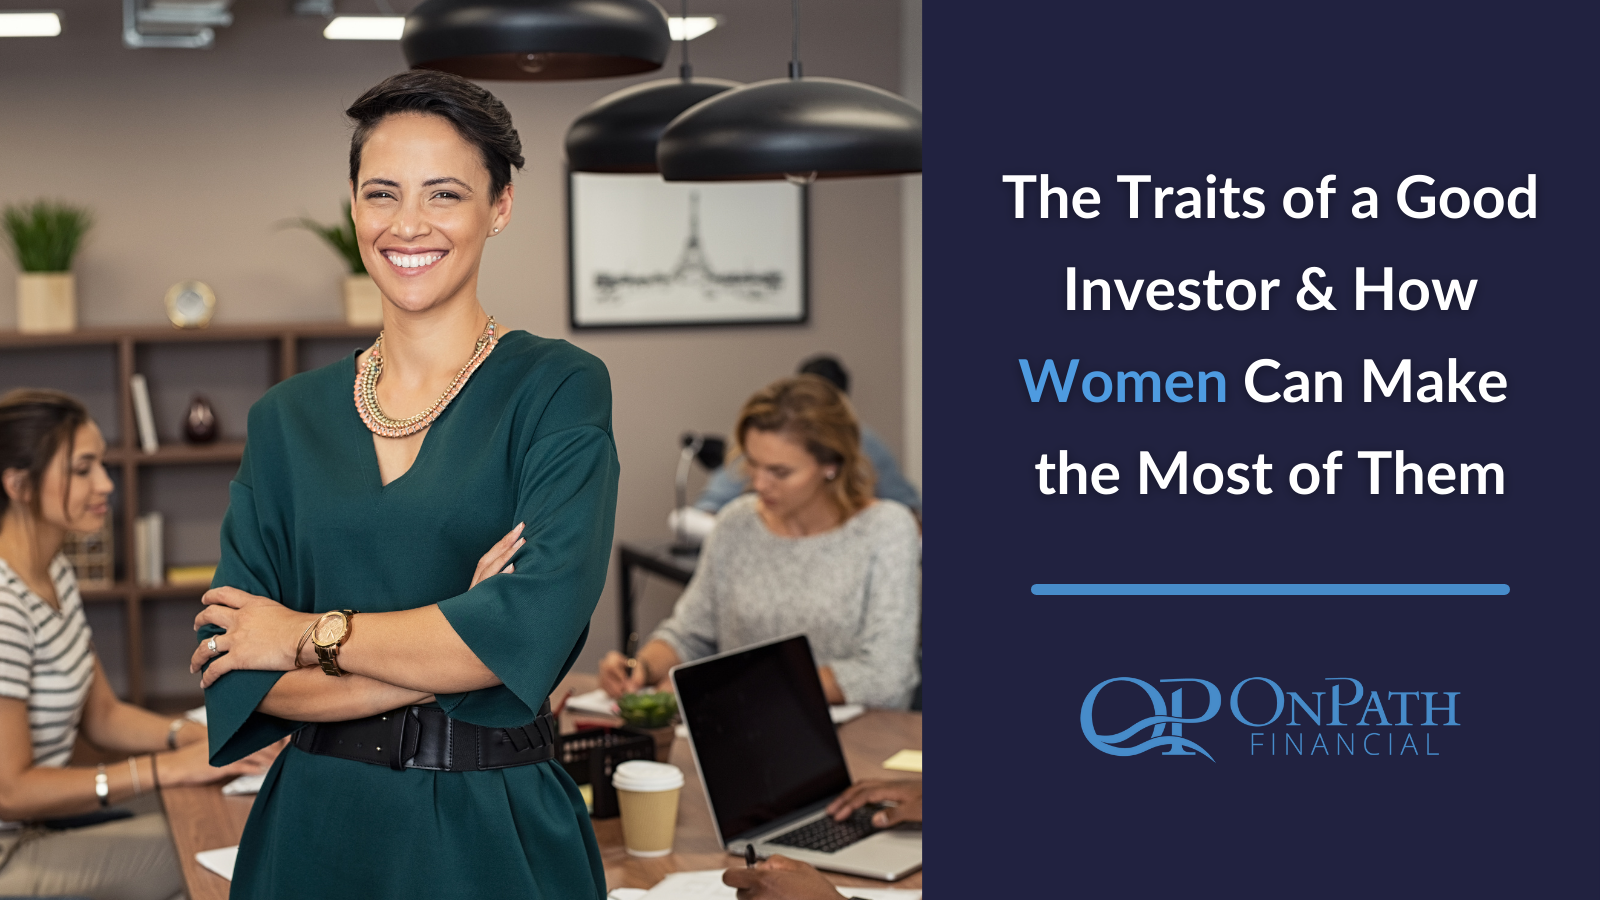 The Traits of a Good Investor & How Women Can Make the Most of Them